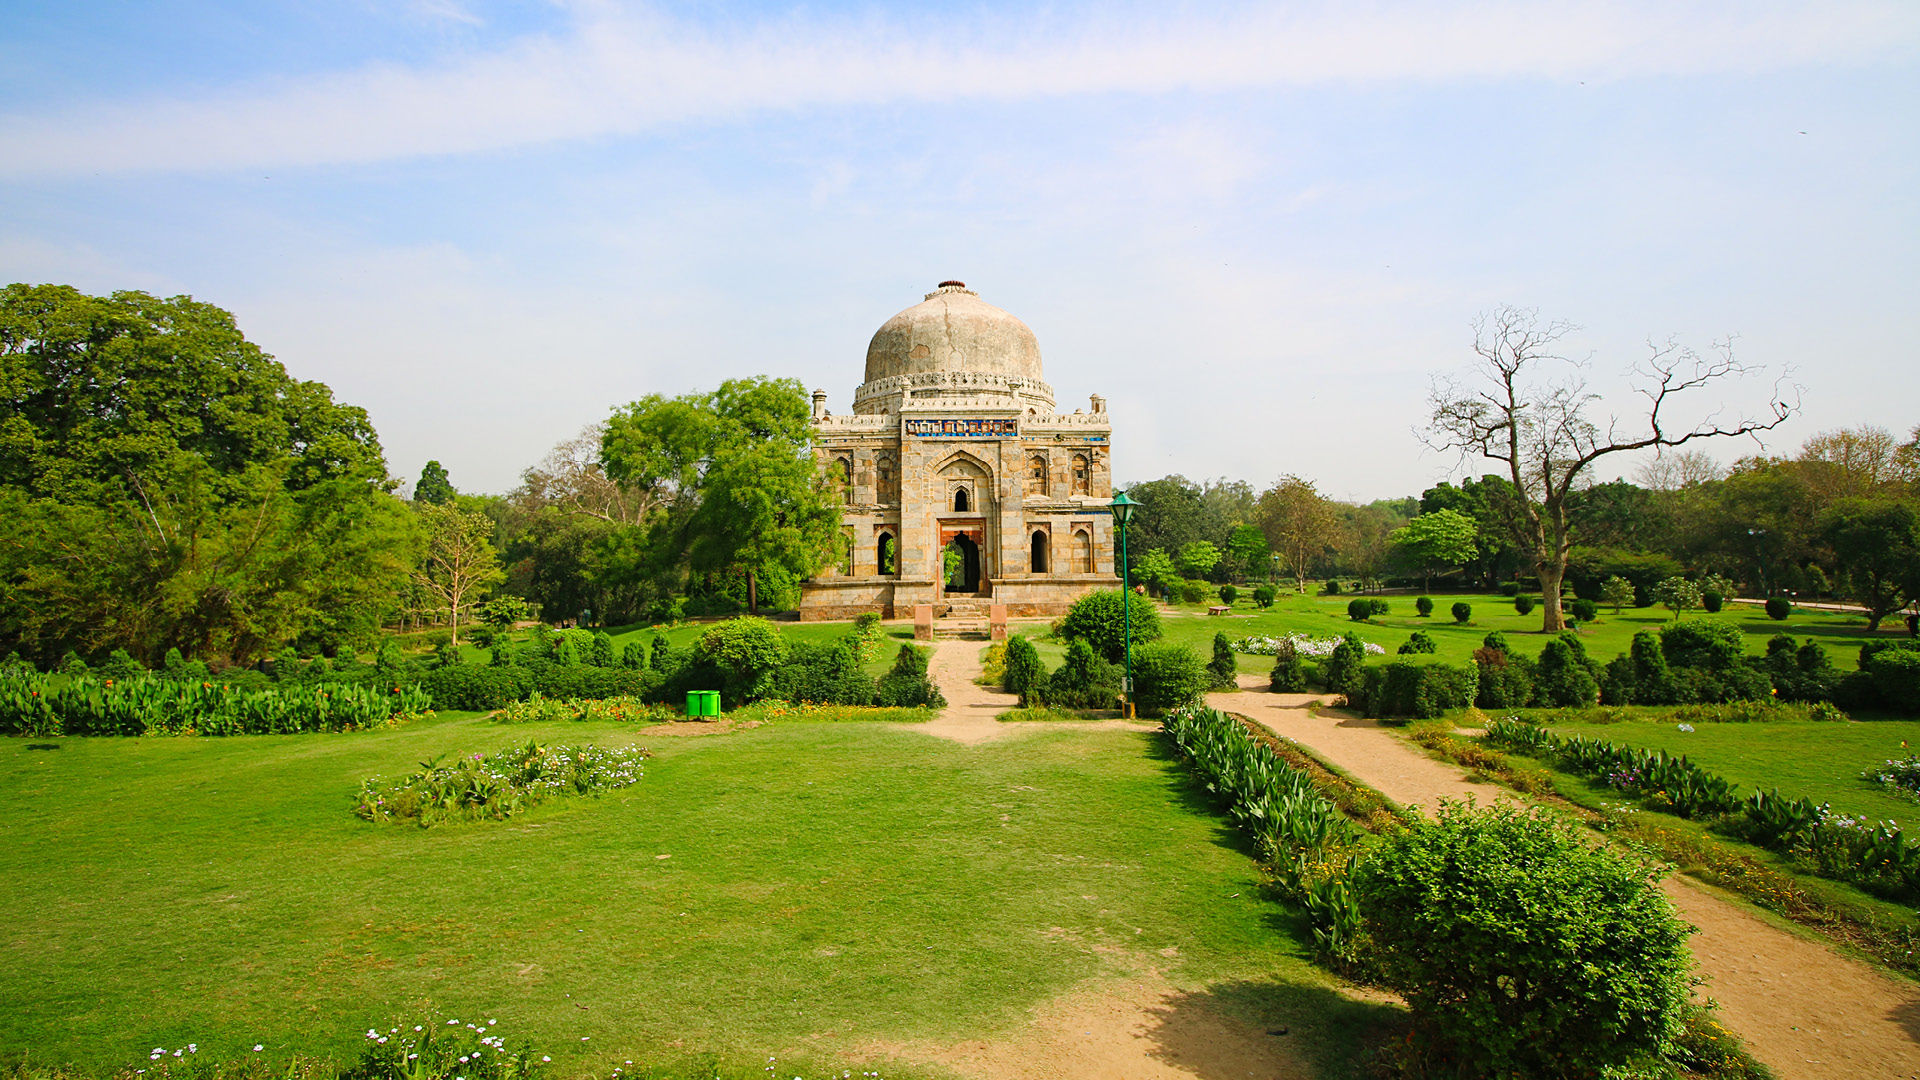 You Can Now Go For A Walk To Delhi's Lodhi Garden & Other Parks